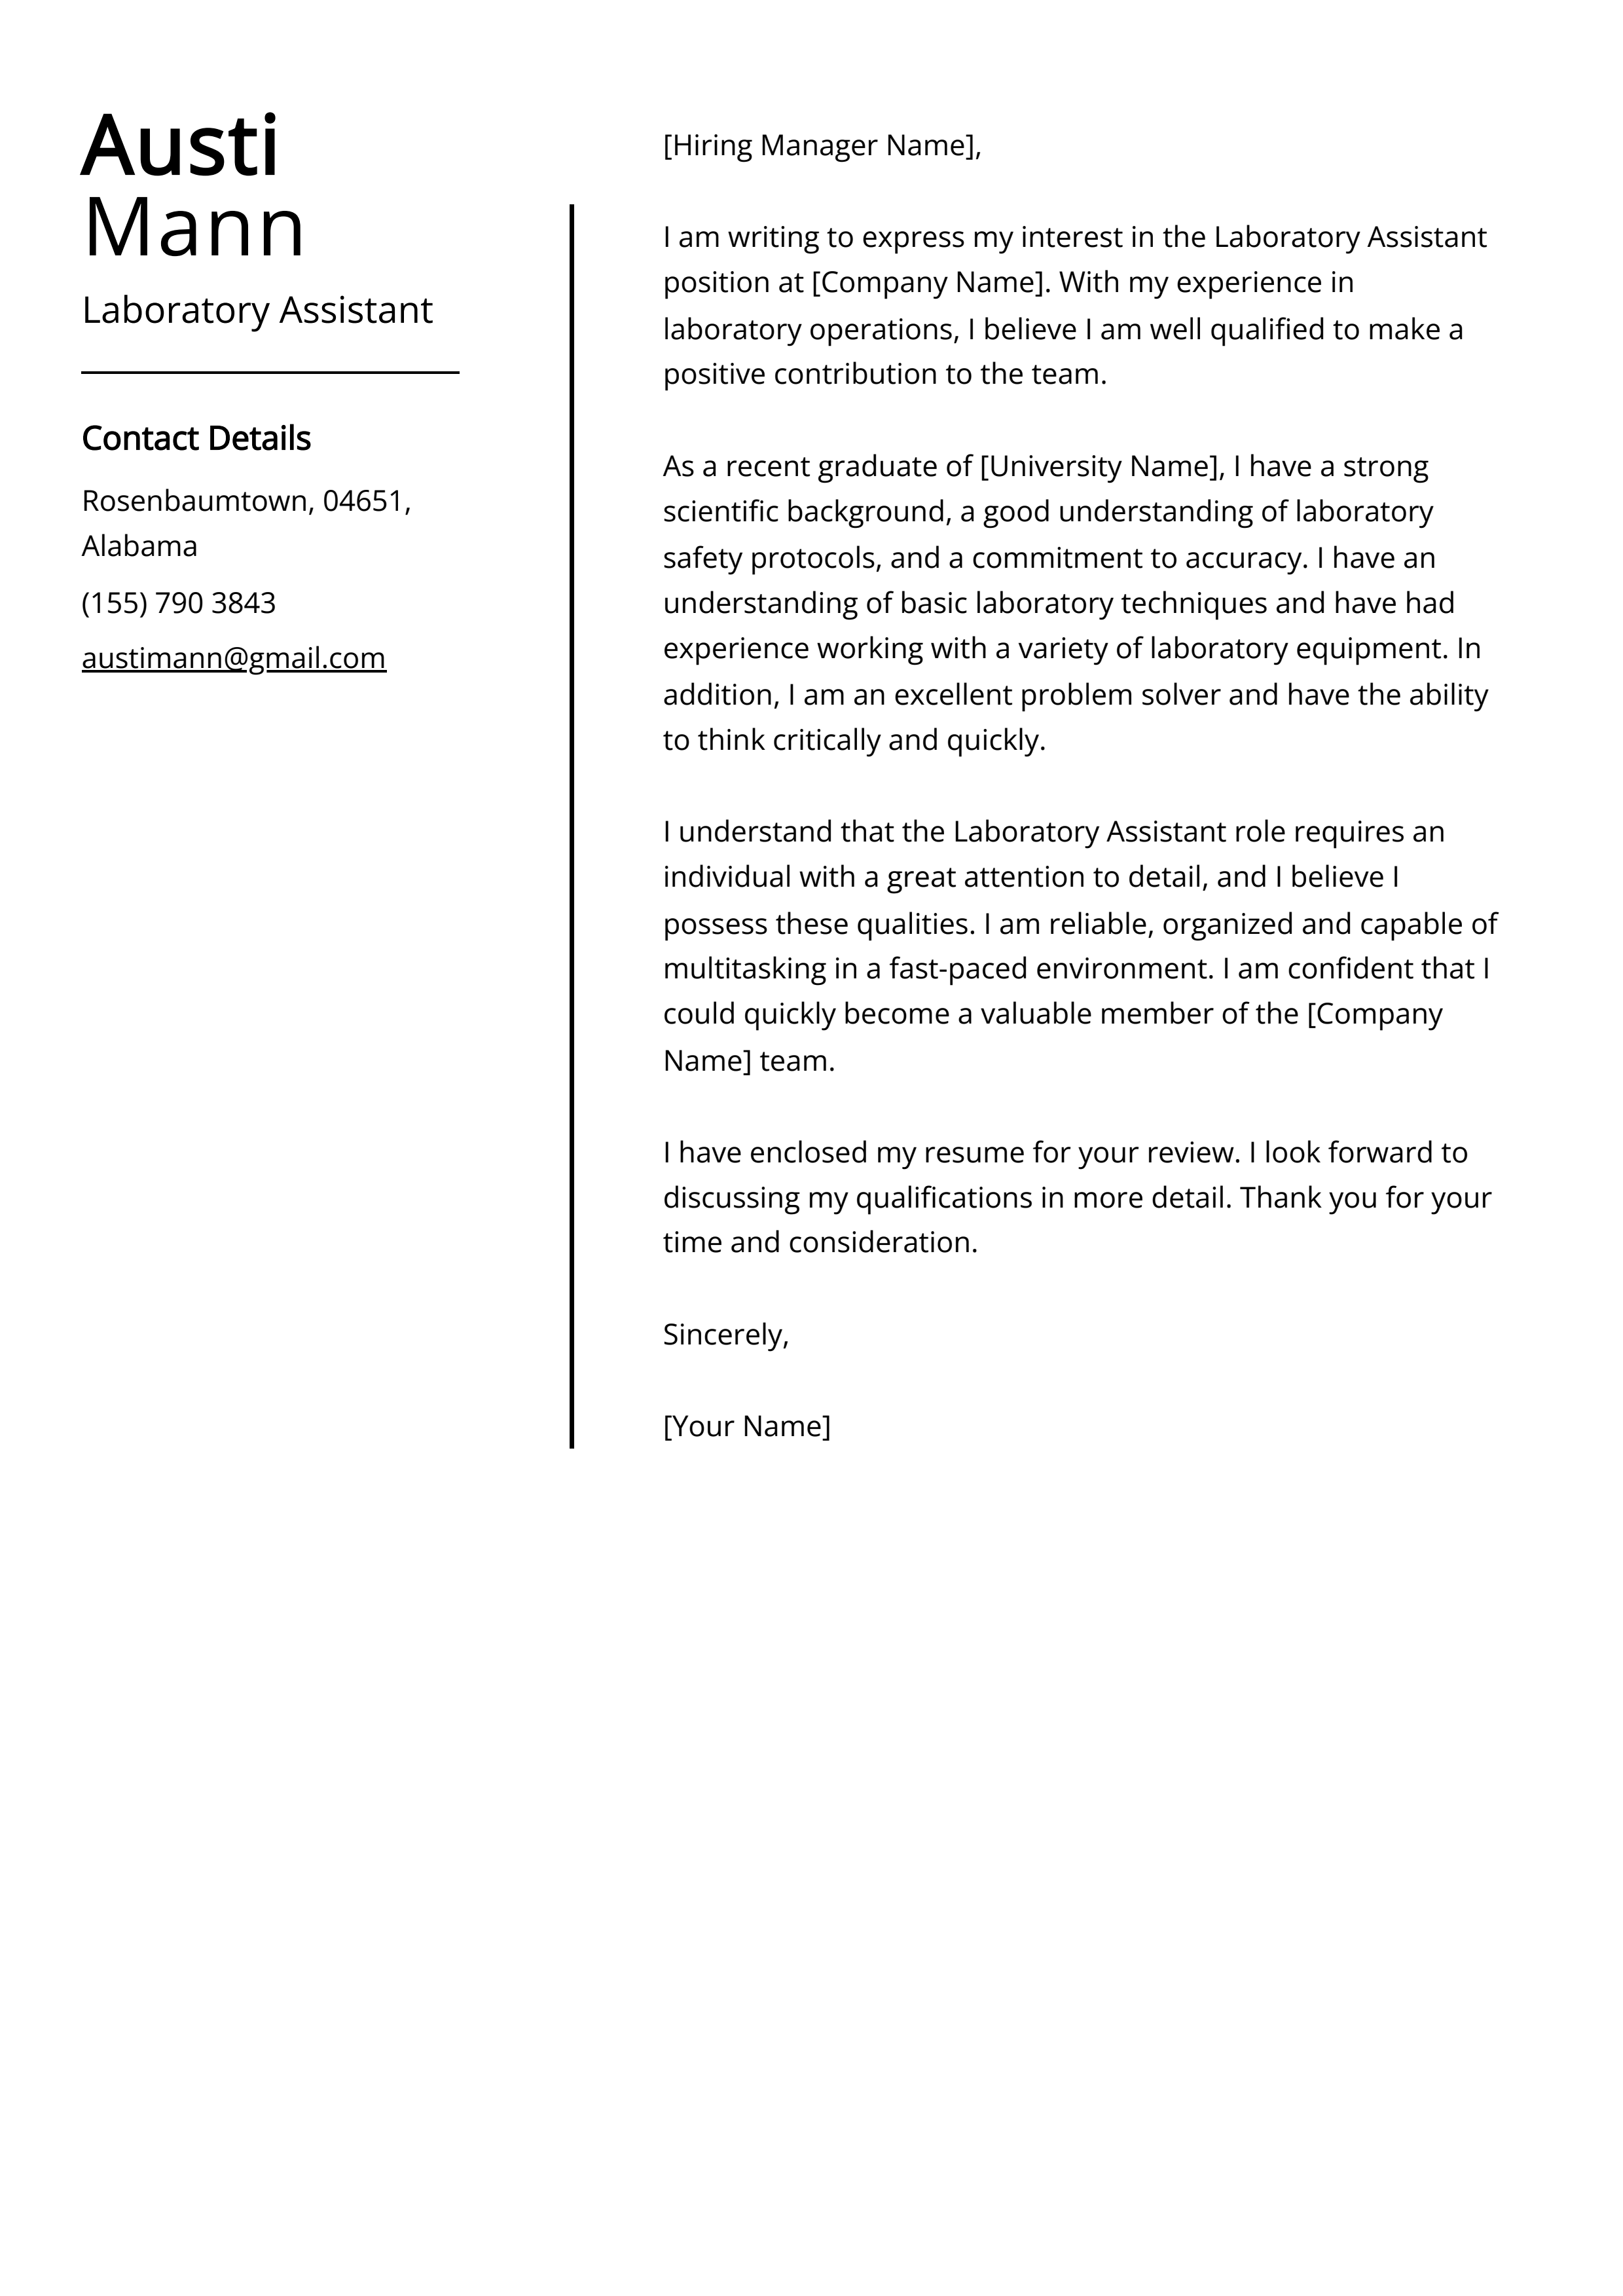 Laboratory Assistant Cover Letter Example